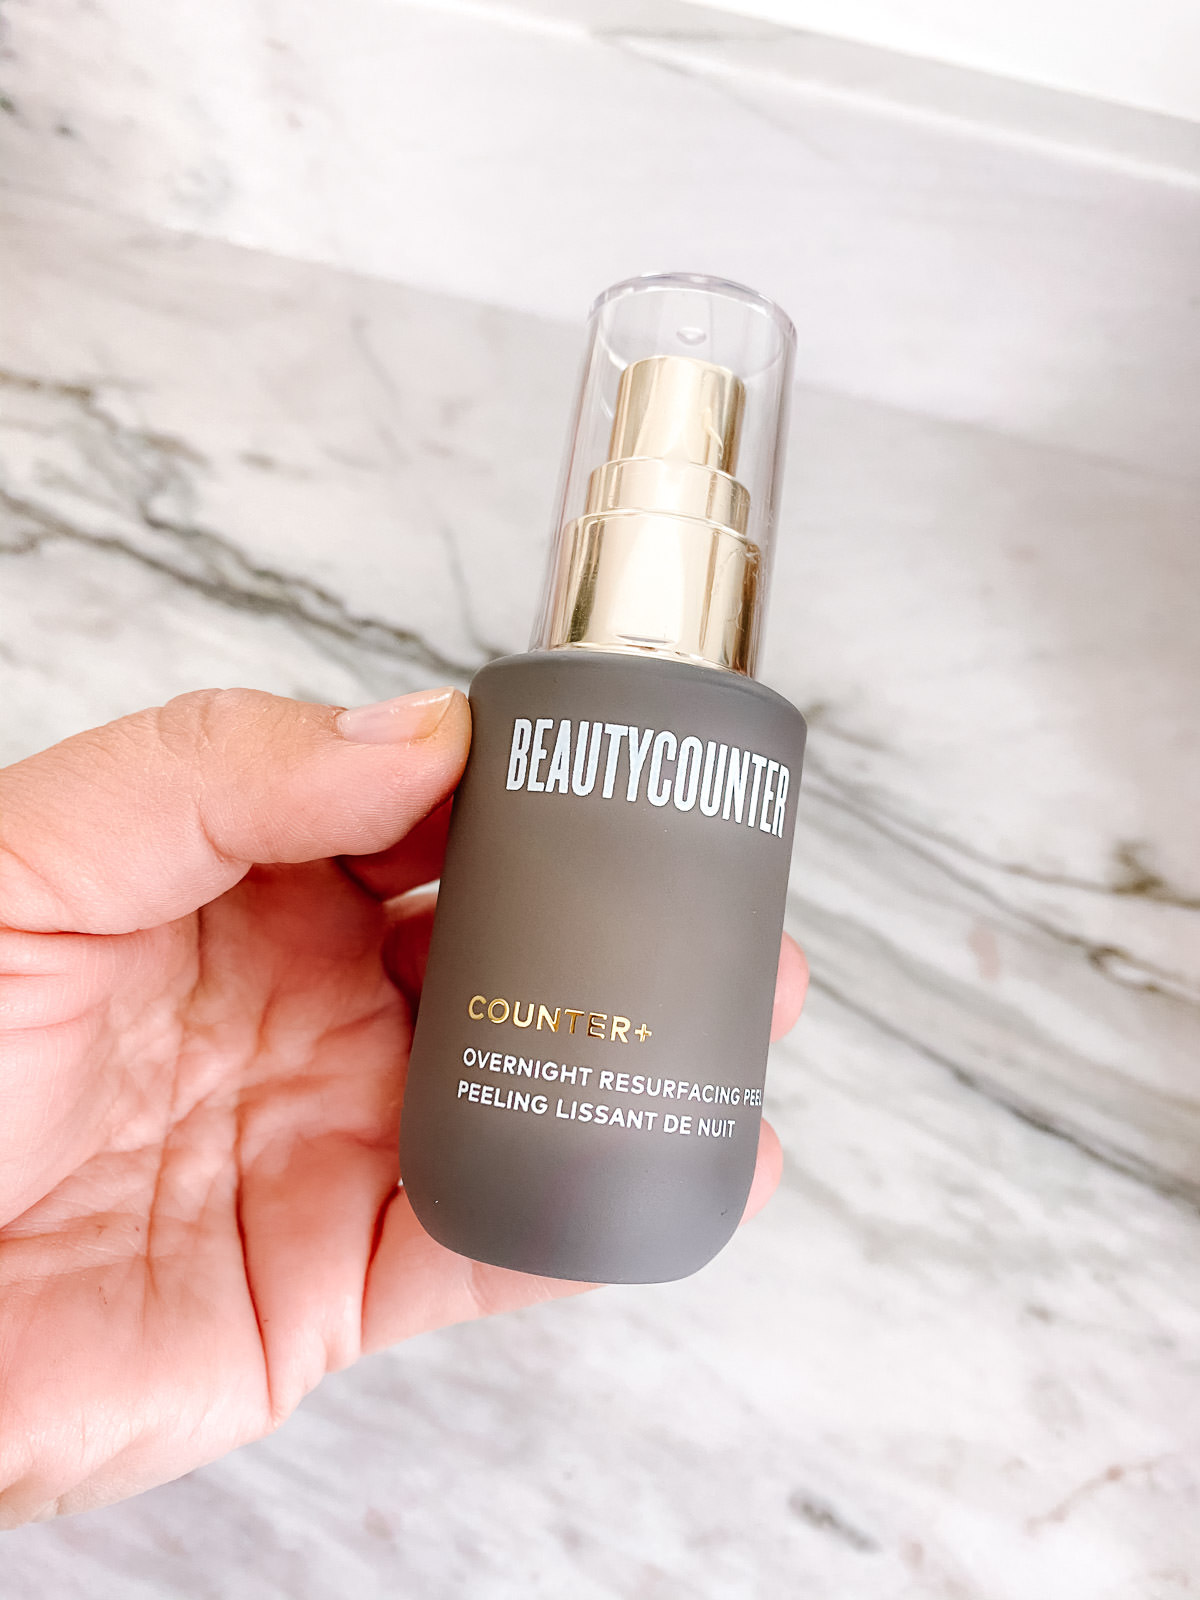 Beautycounter Counter+ overnight resurfacing peel is not worth it according to beauty influencer Cristin Cooper. 